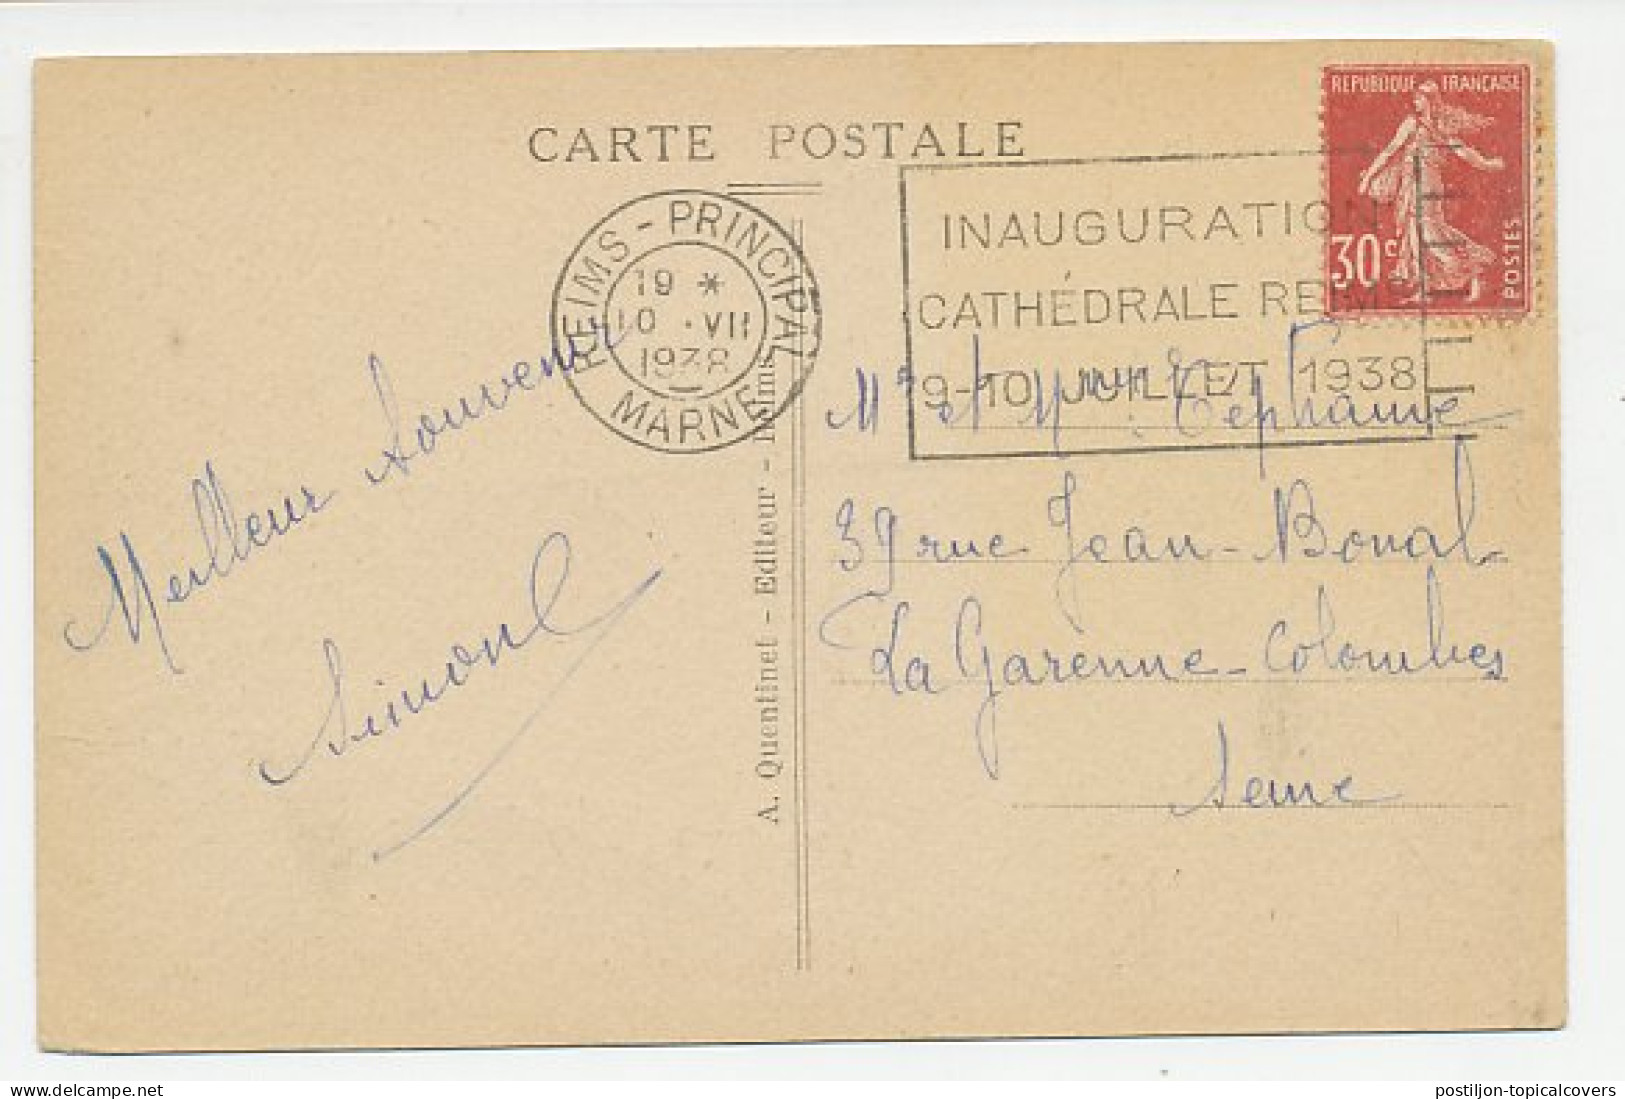 Postcard / Postmark France 1938 Cathedral Reims - Inauguration - Iglesias Y Catedrales